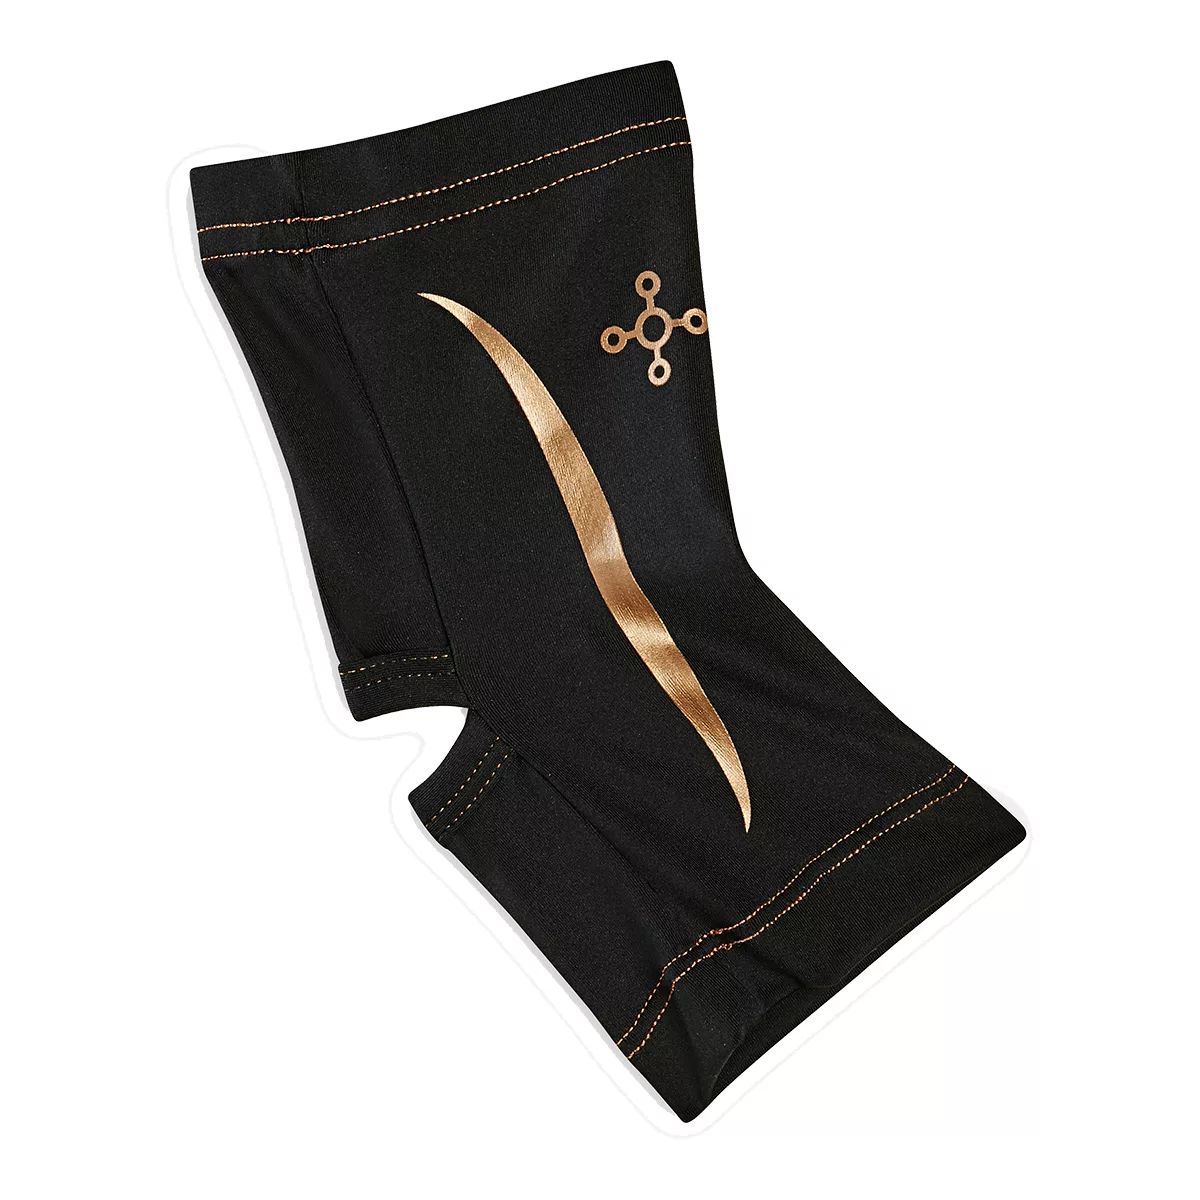 Image of Tommie Copper Compression Ankle Sleeve - Black